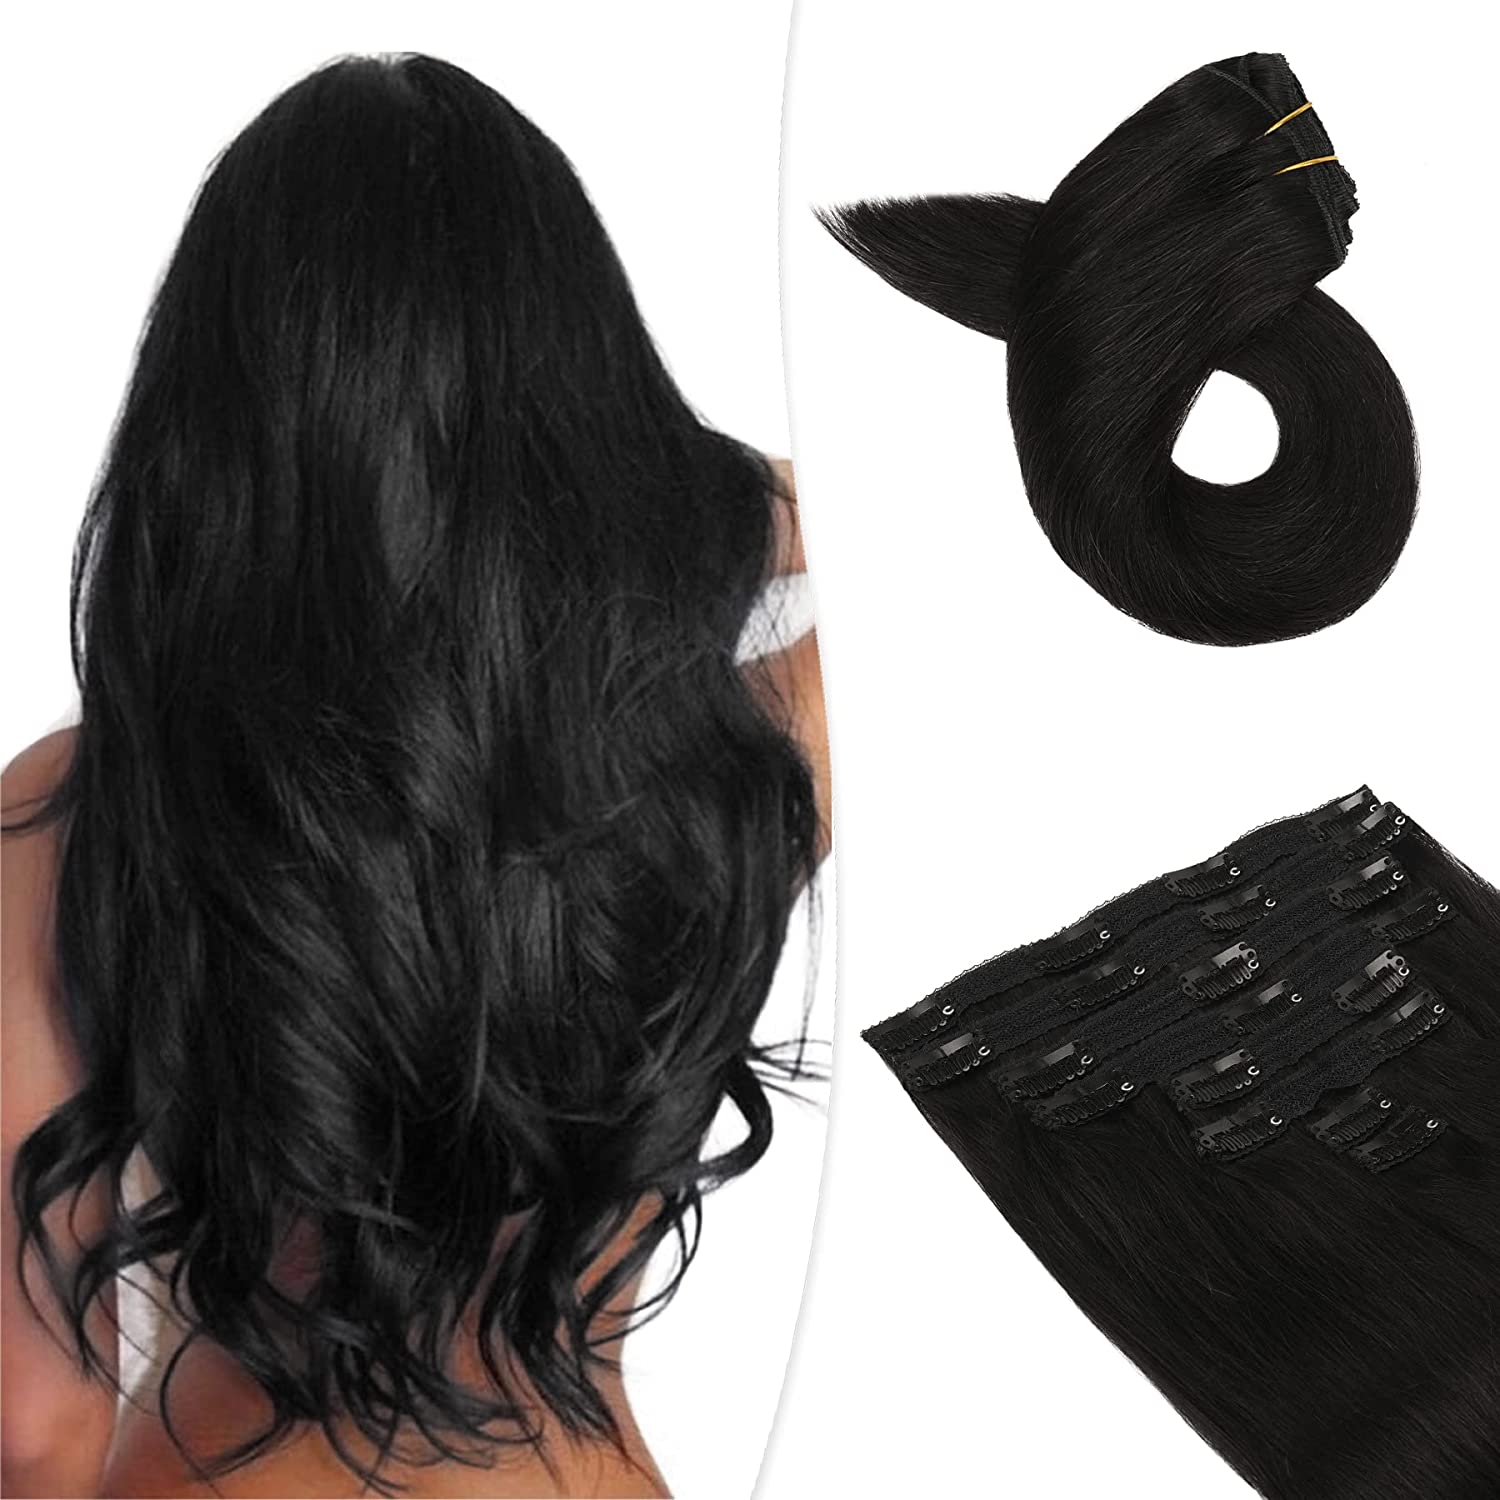 Straight Seamless Clip-In Hair Extensions – Perfect Locks